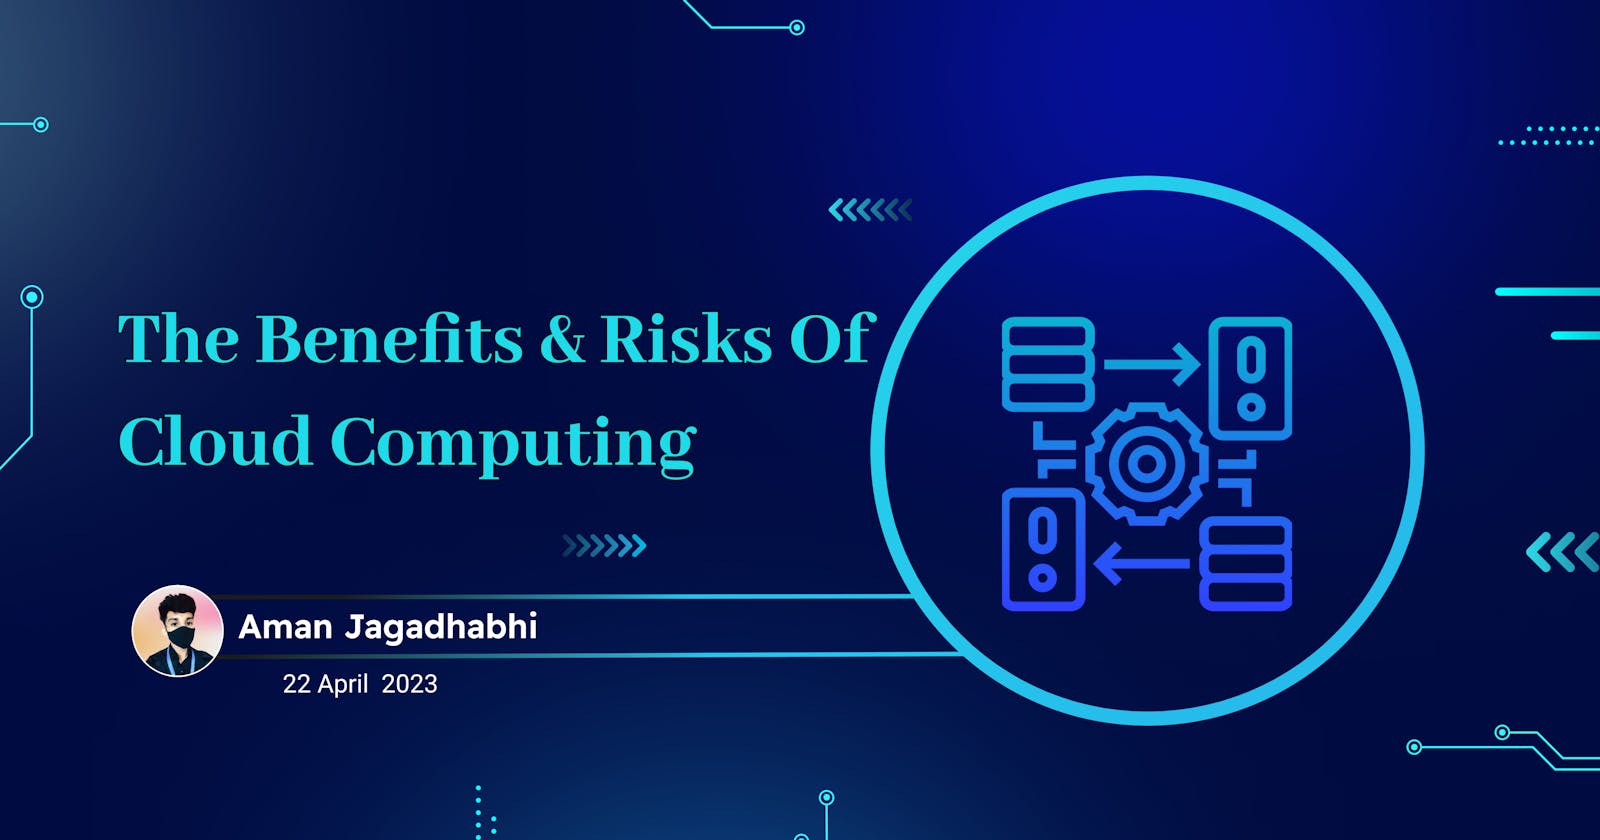 The Benefits & Risks Of Cloud Computing